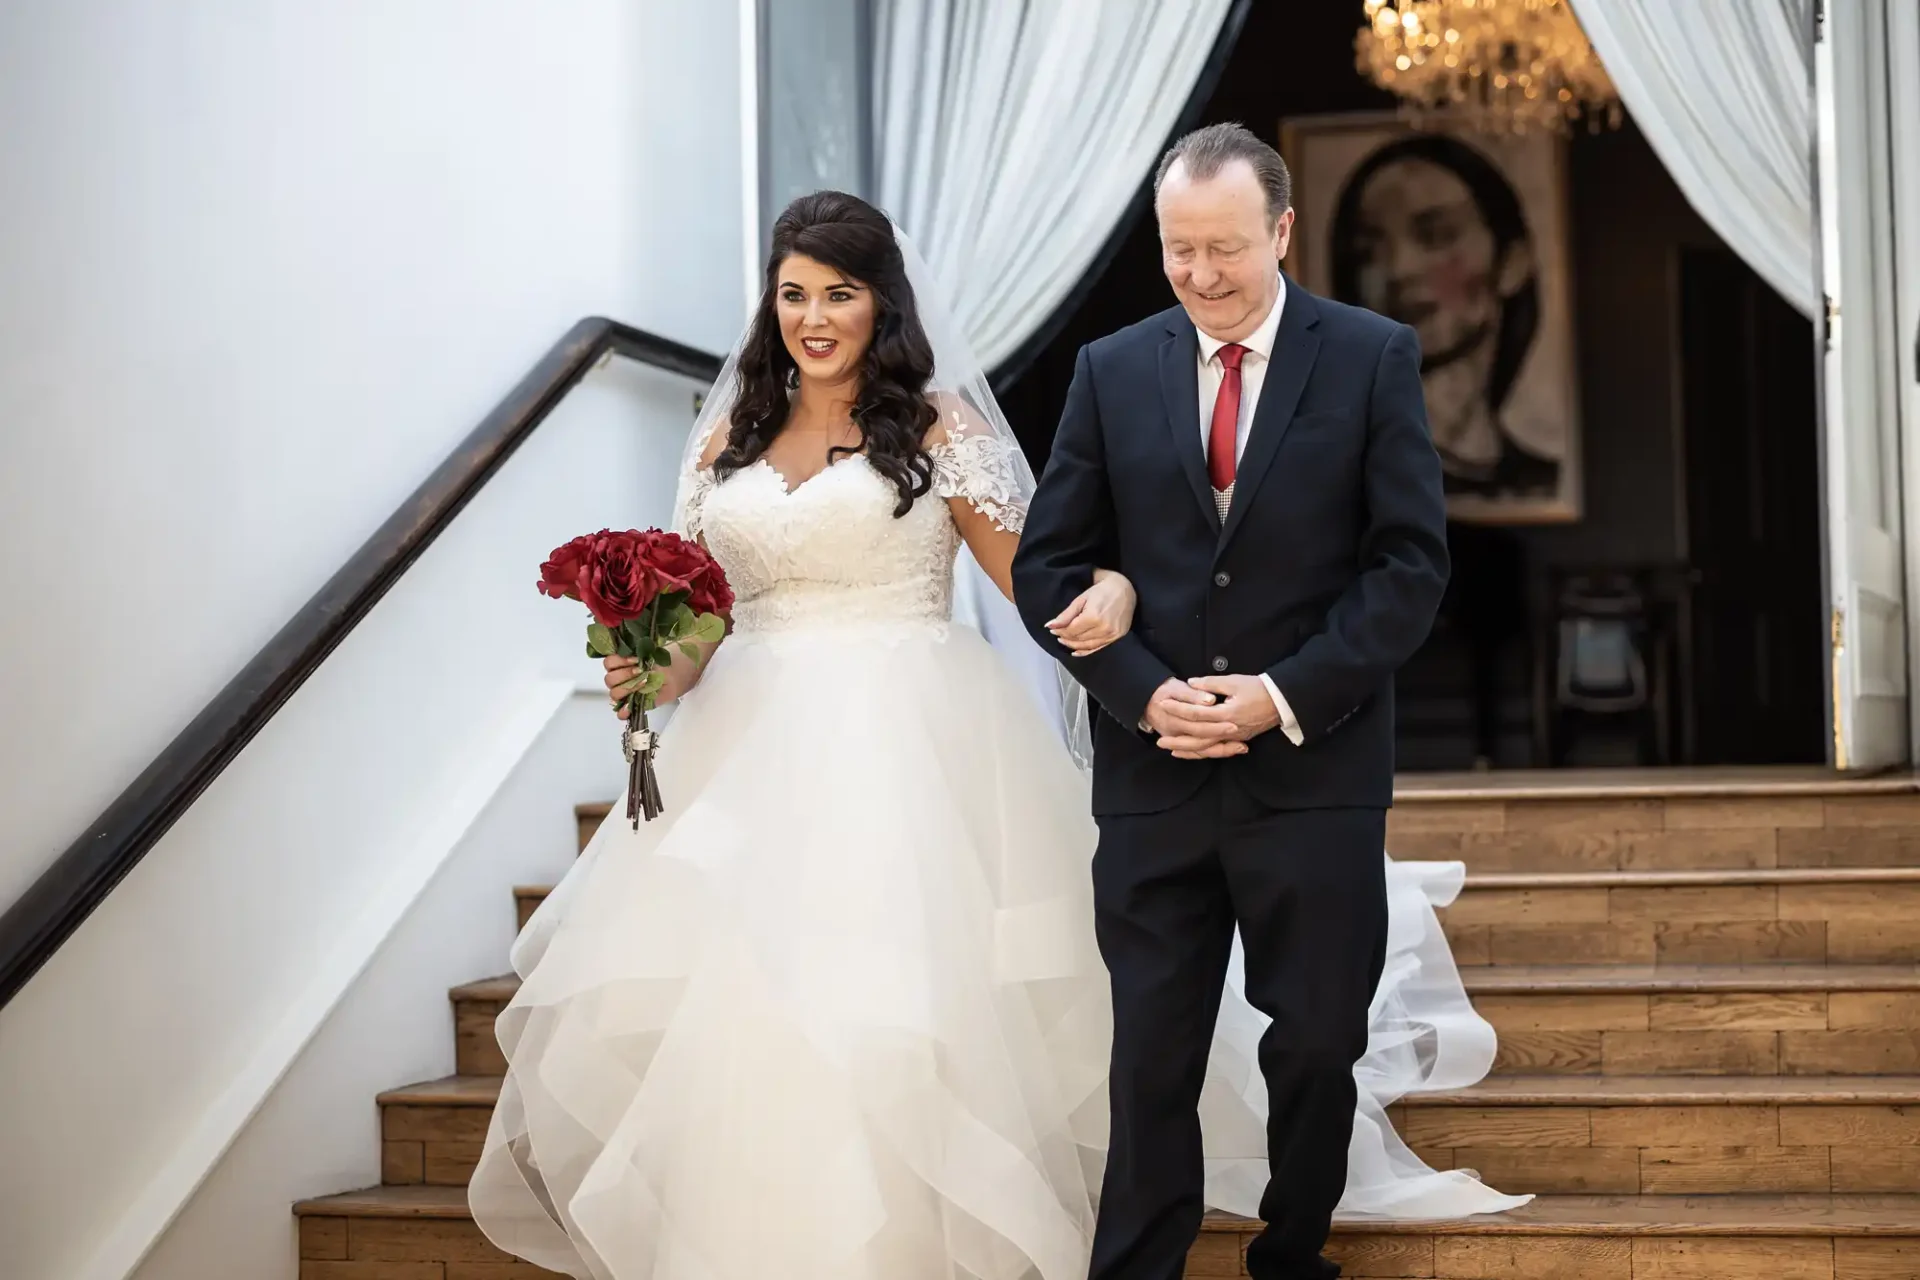 Bride and father descend a staircase, smiling, at a wedding venue. she holds a red bouquet; both are dressed formally.